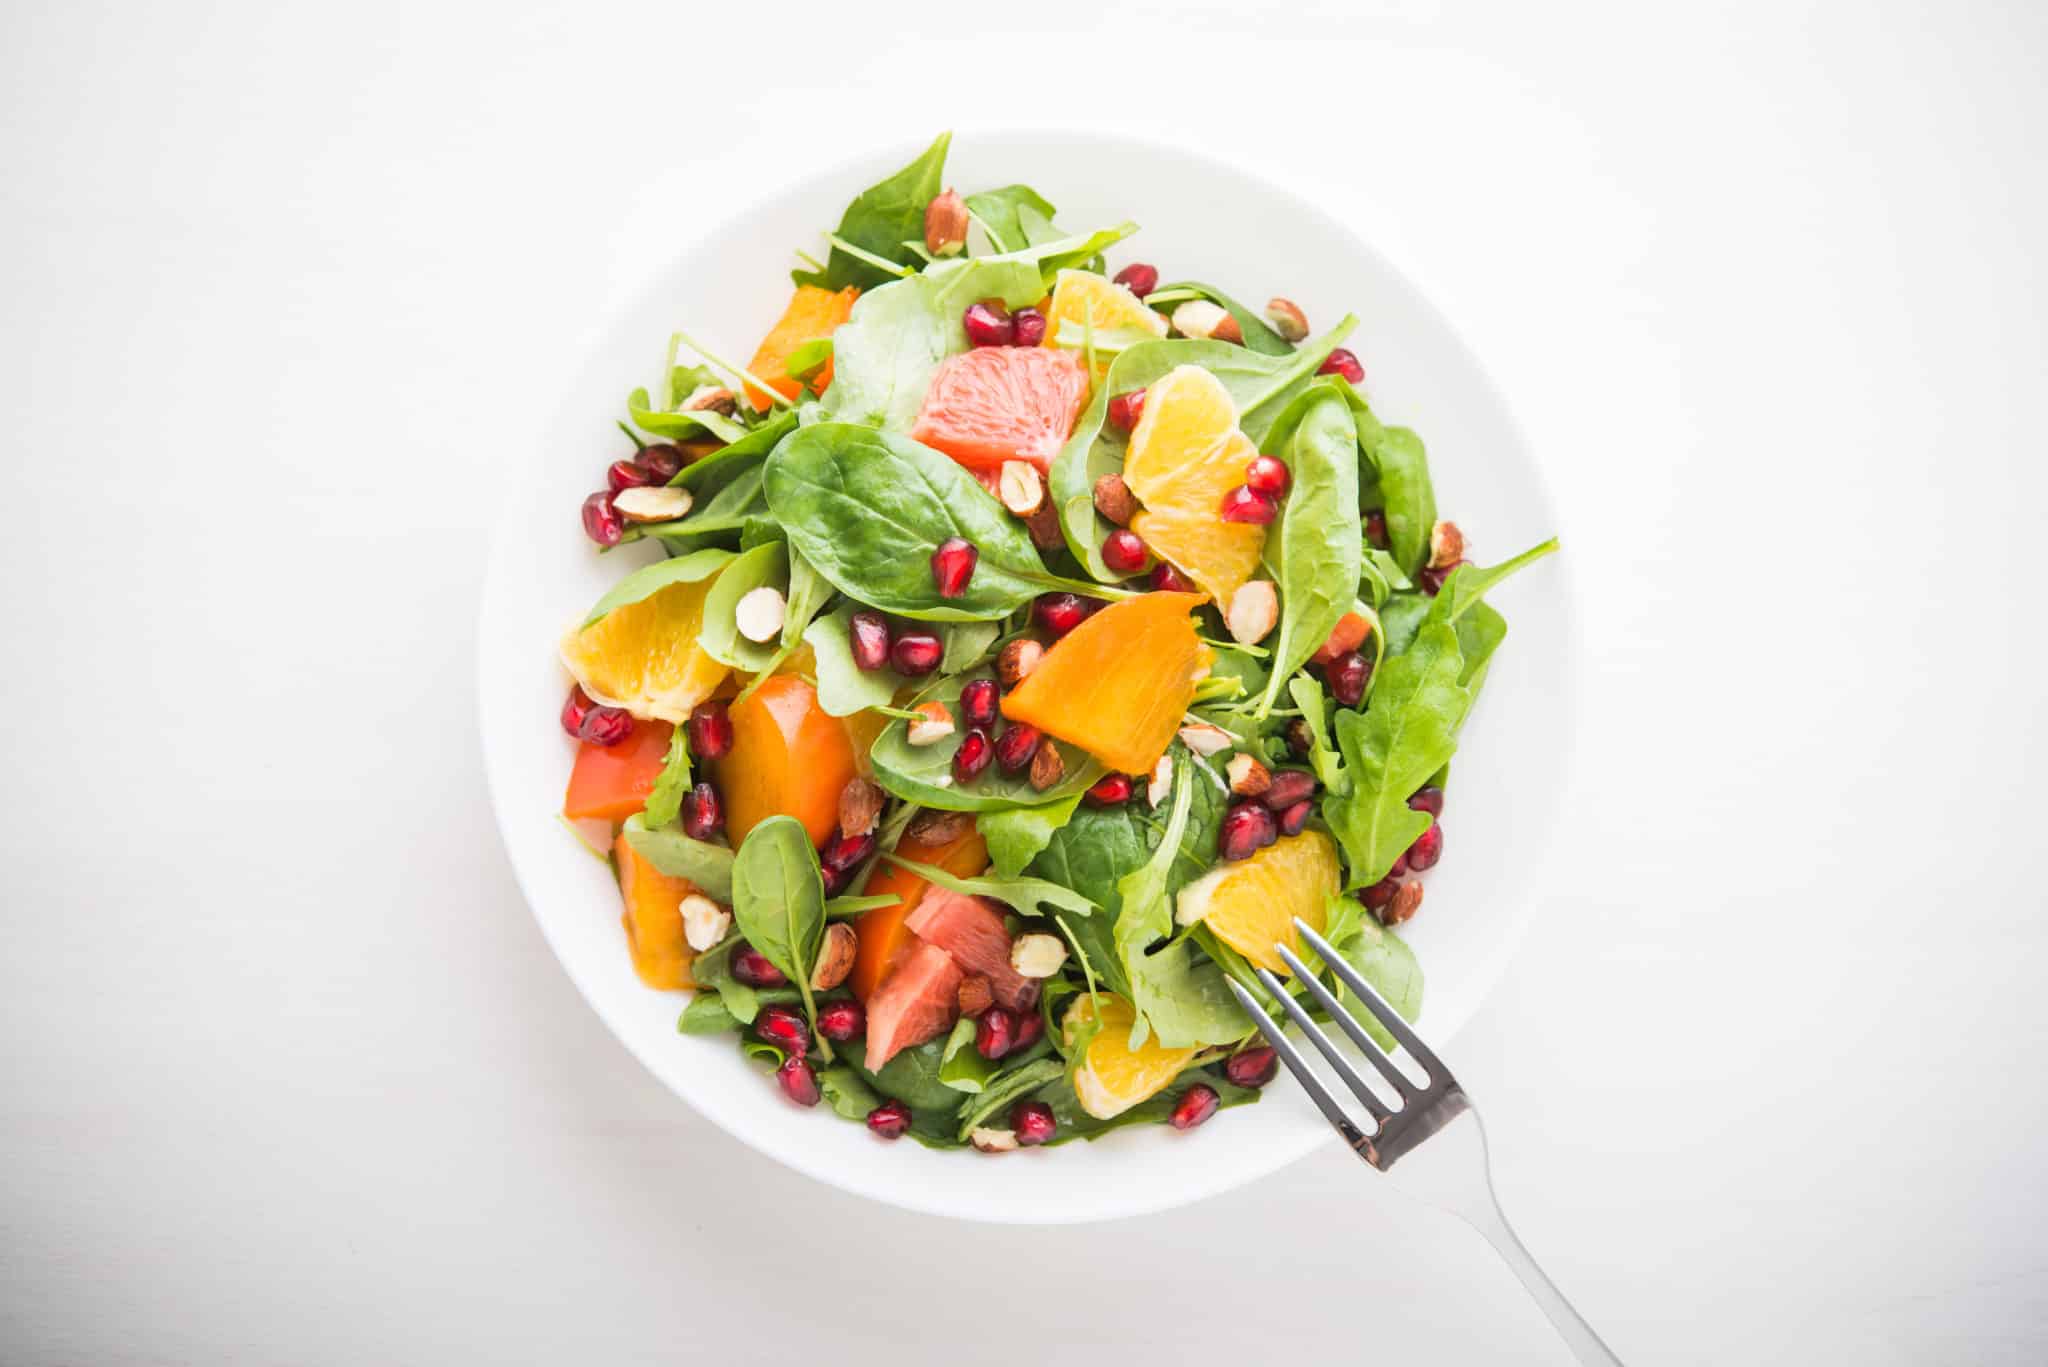 Think all salads are automatically healthy? Well, not always: these 7 mistakes can turn your salad from healthy to calorie bombs.